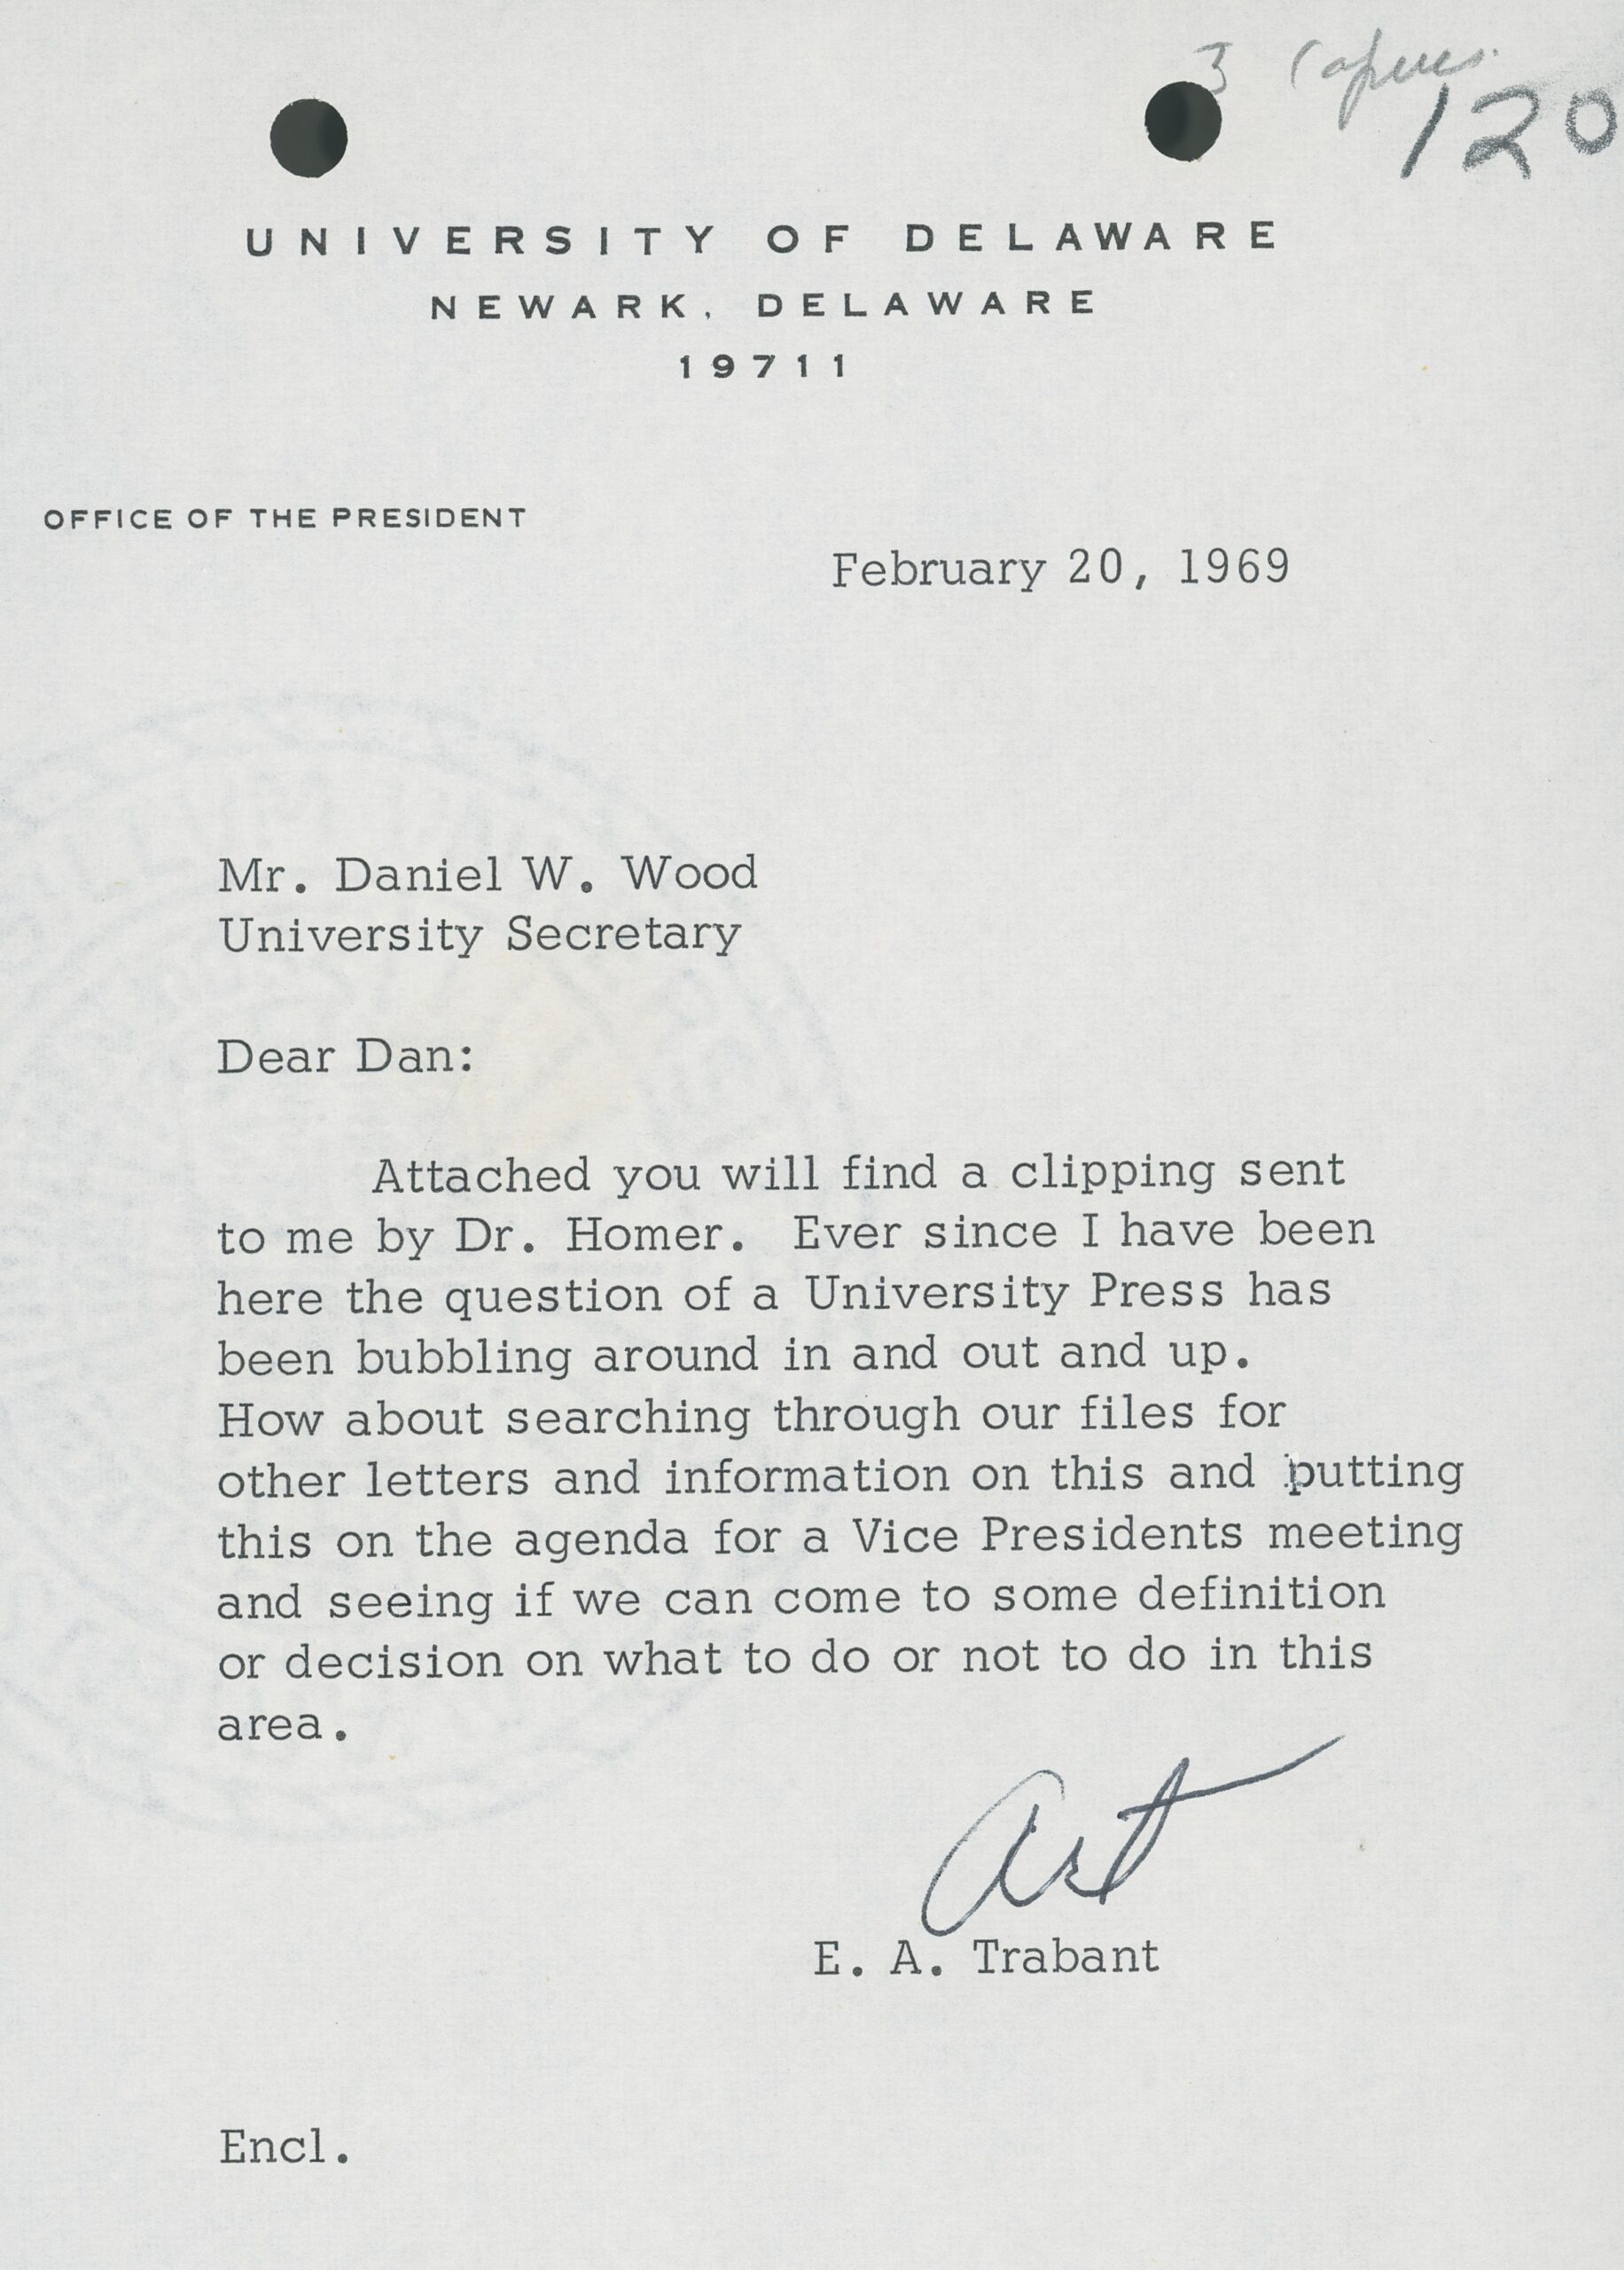 Letter from E. A. Trabant to Daniel W. Wood February, 20 1969